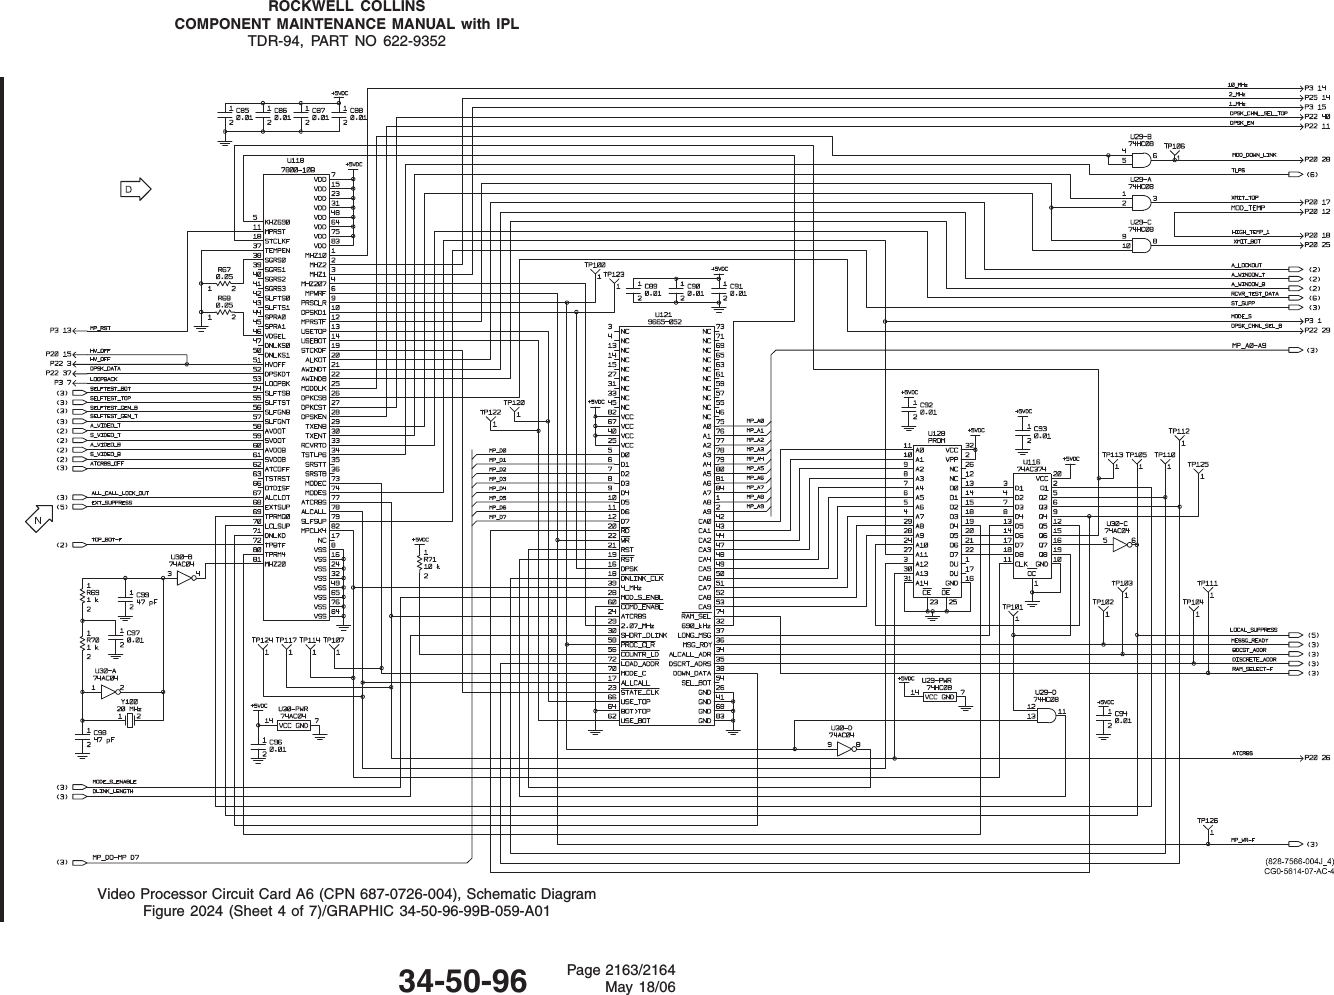 ROCKWELL COLLINSCOMPONENT MAINTENANCE MANUAL with IPLTDR-94, PART NO 622-9352Video Processor Circuit Card A6 (CPN 687-0726-004), Schematic DiagramFigure 2024 (Sheet 4 of 7)/GRAPHIC 34-50-96-99B-059-A0134-50-96 Page 2163/2164May 18/06